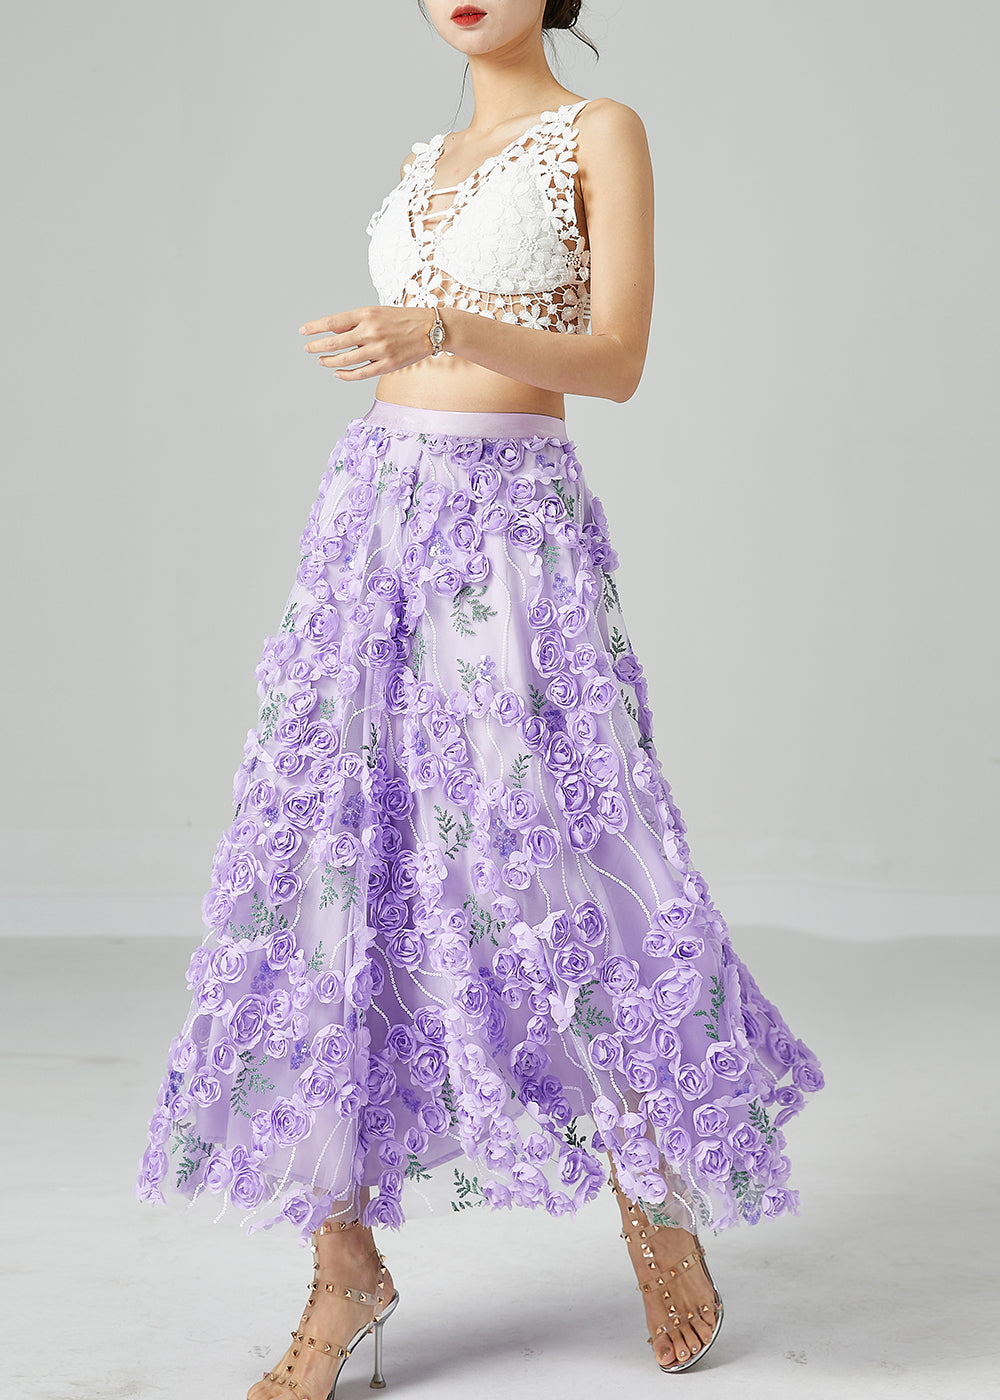 Beautiful Light Purple Embroideried Floral Tulle Skirts Summer